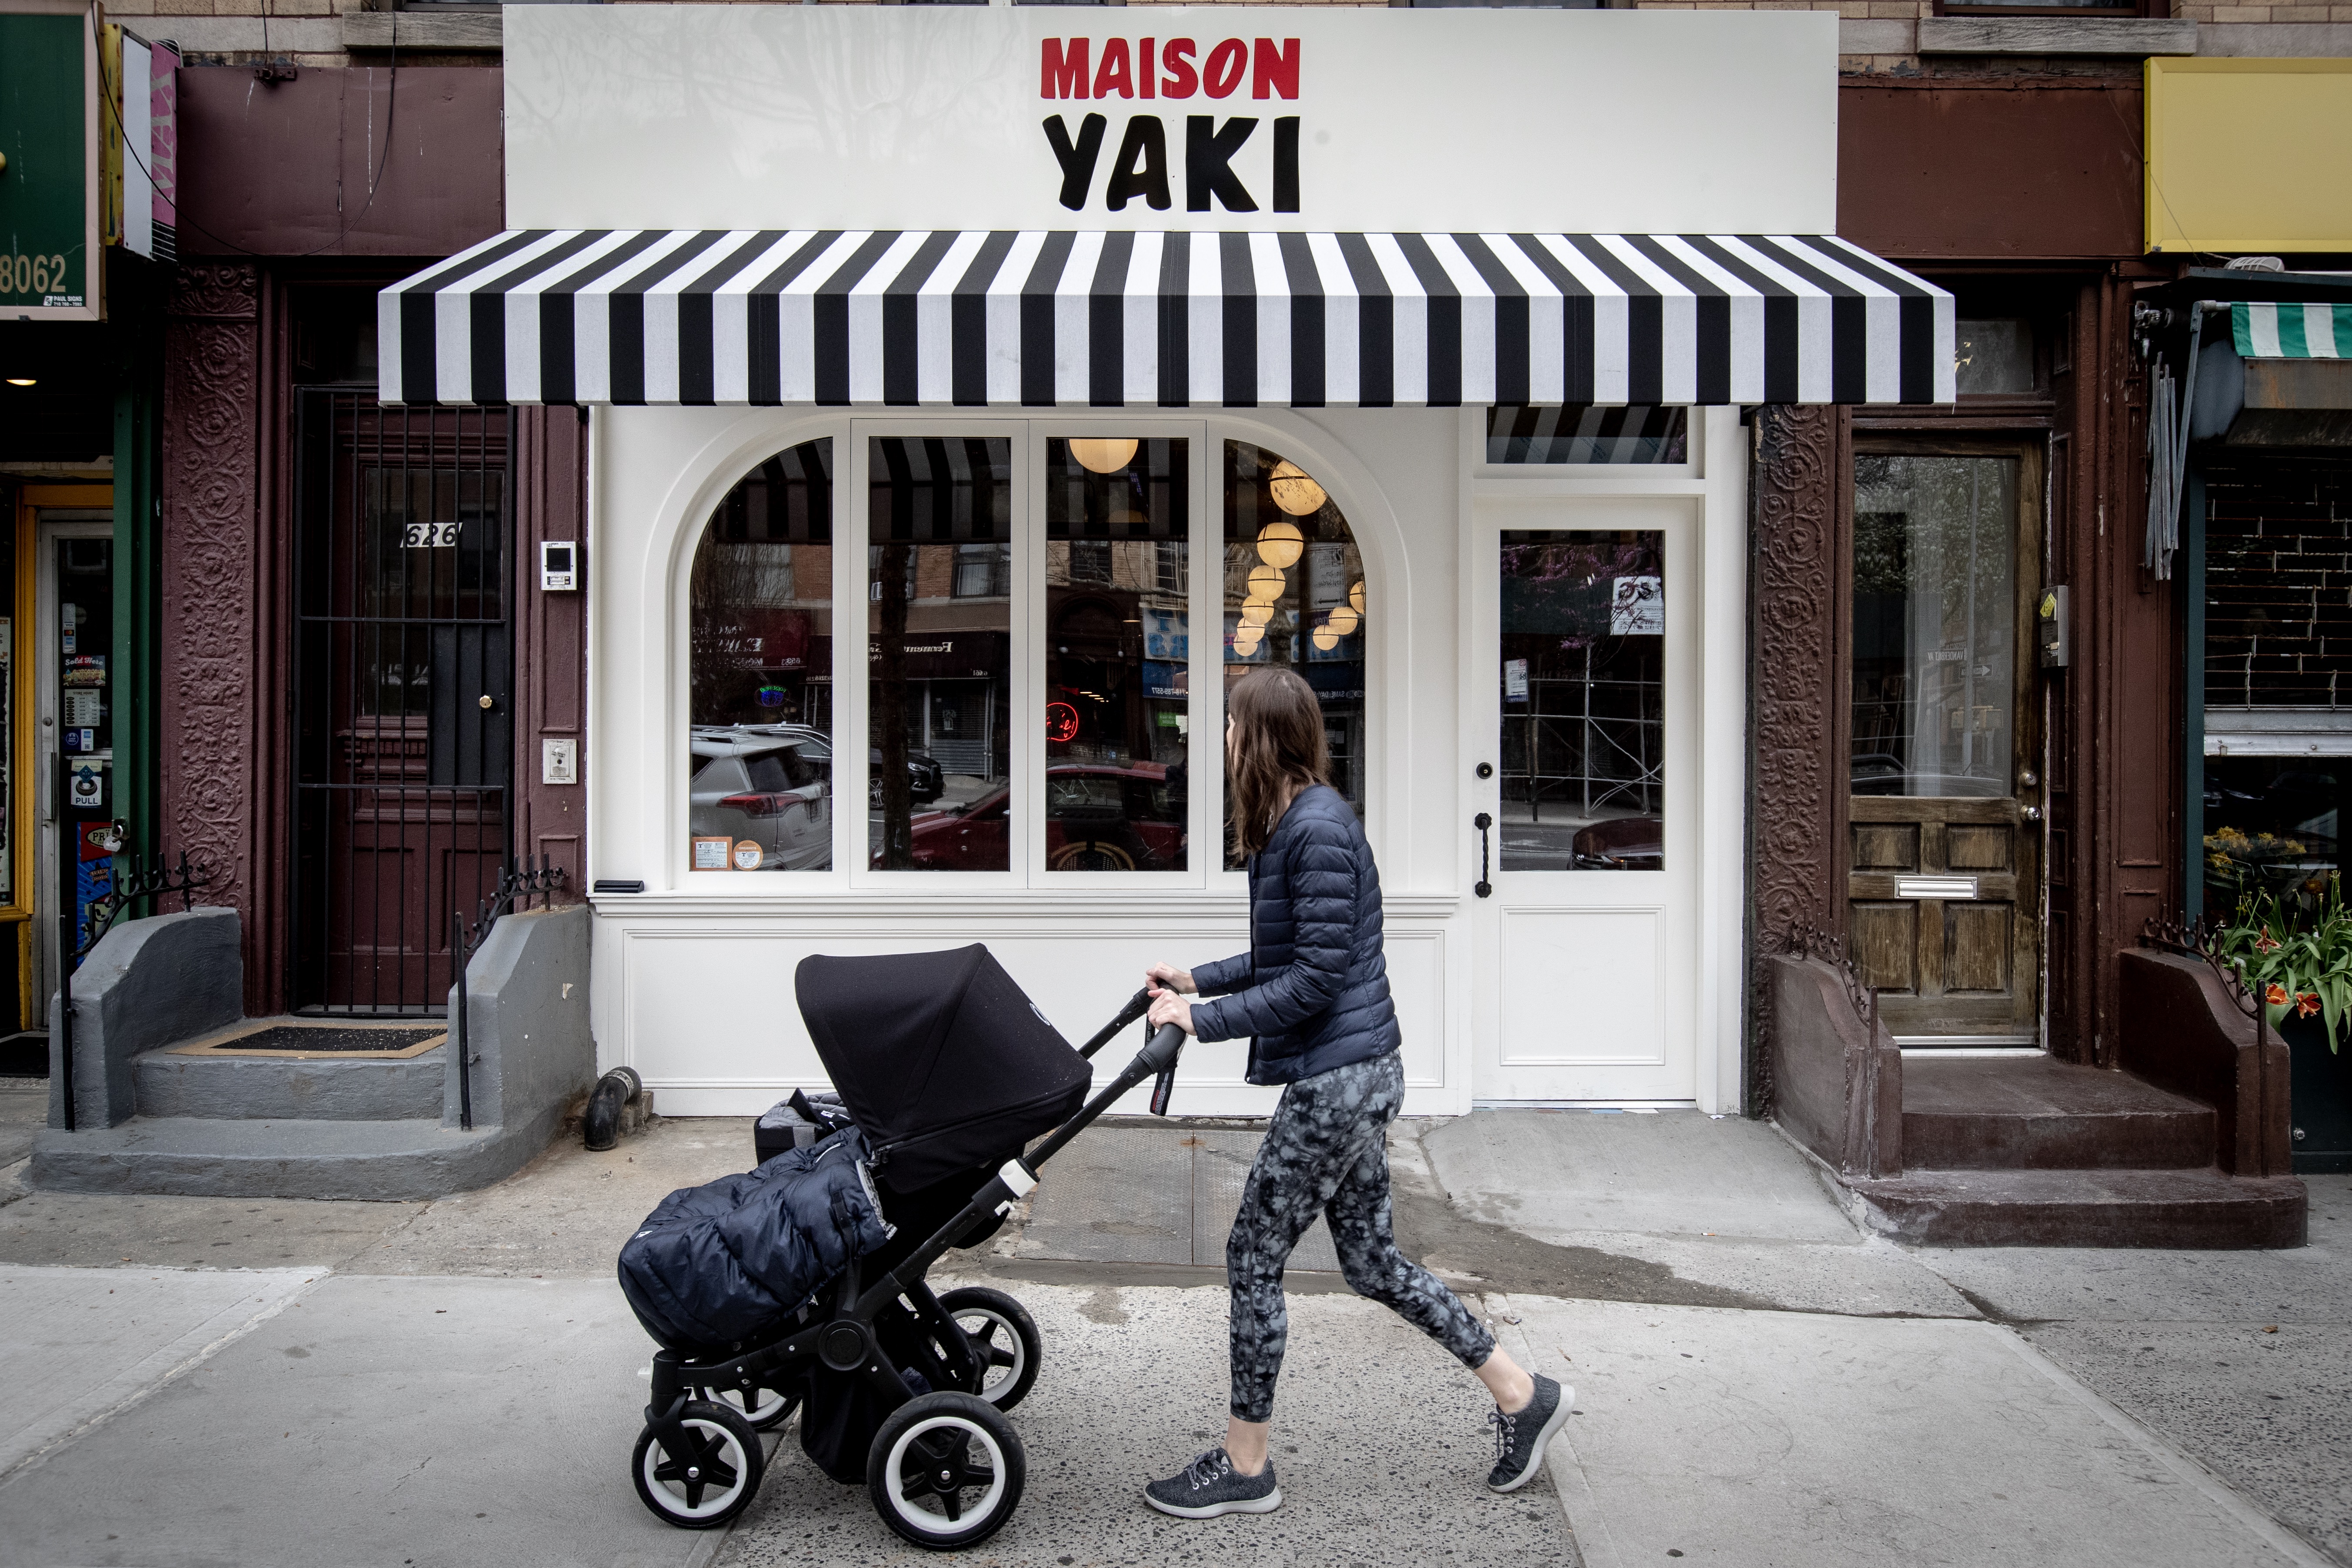 A person with a stroller passes in front of a white restaurant with a striped awning.